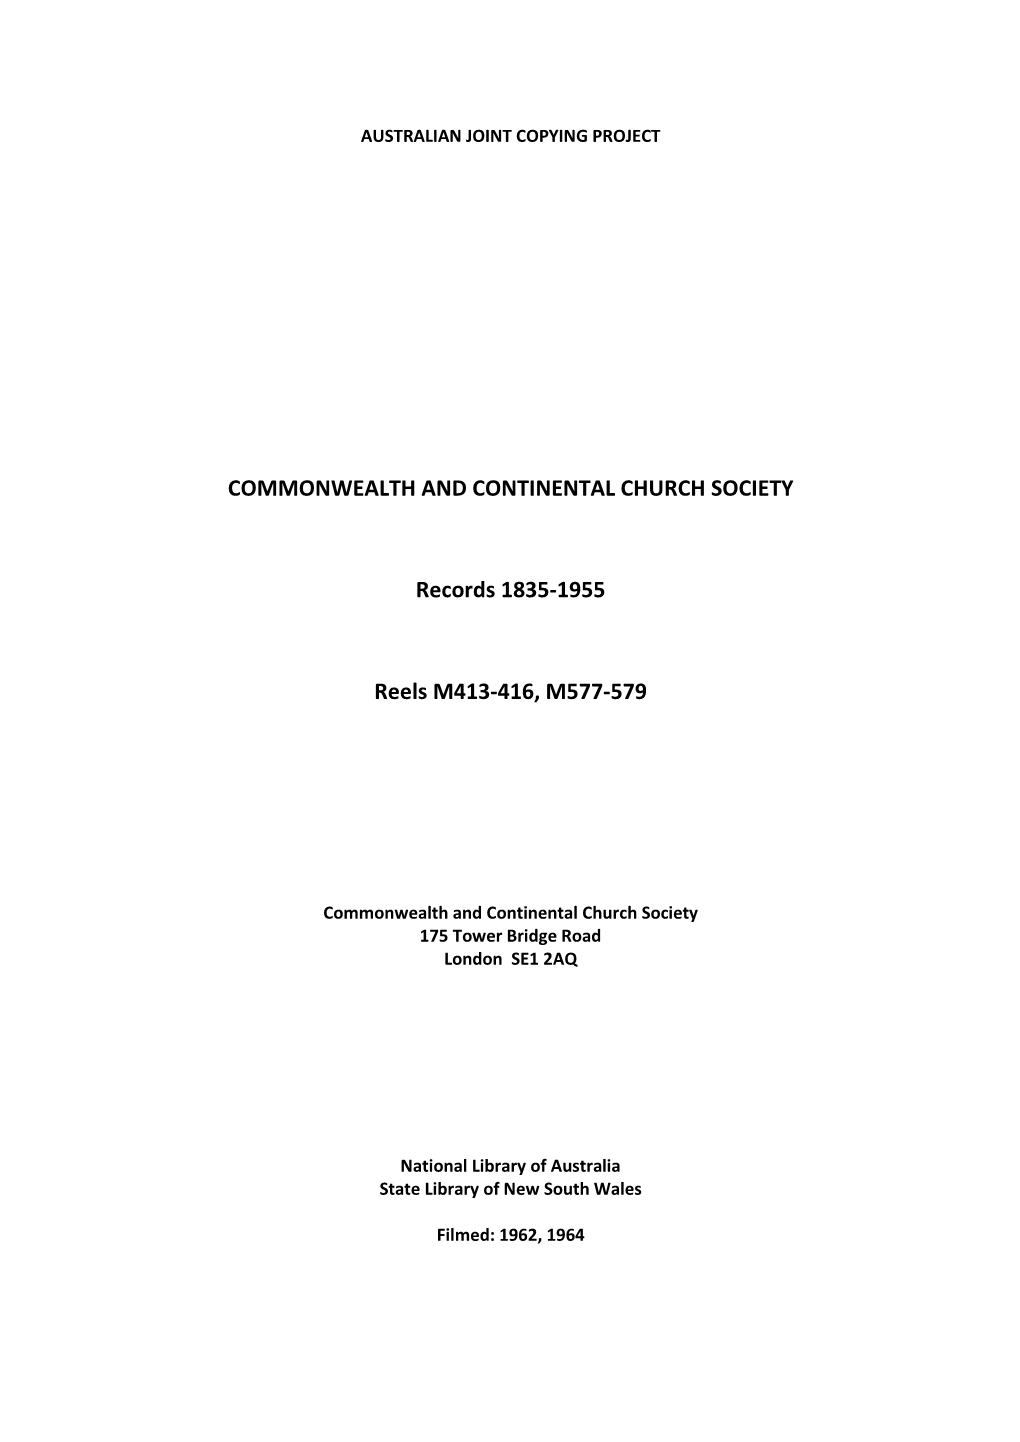 Commonwealth and Continental Church Society